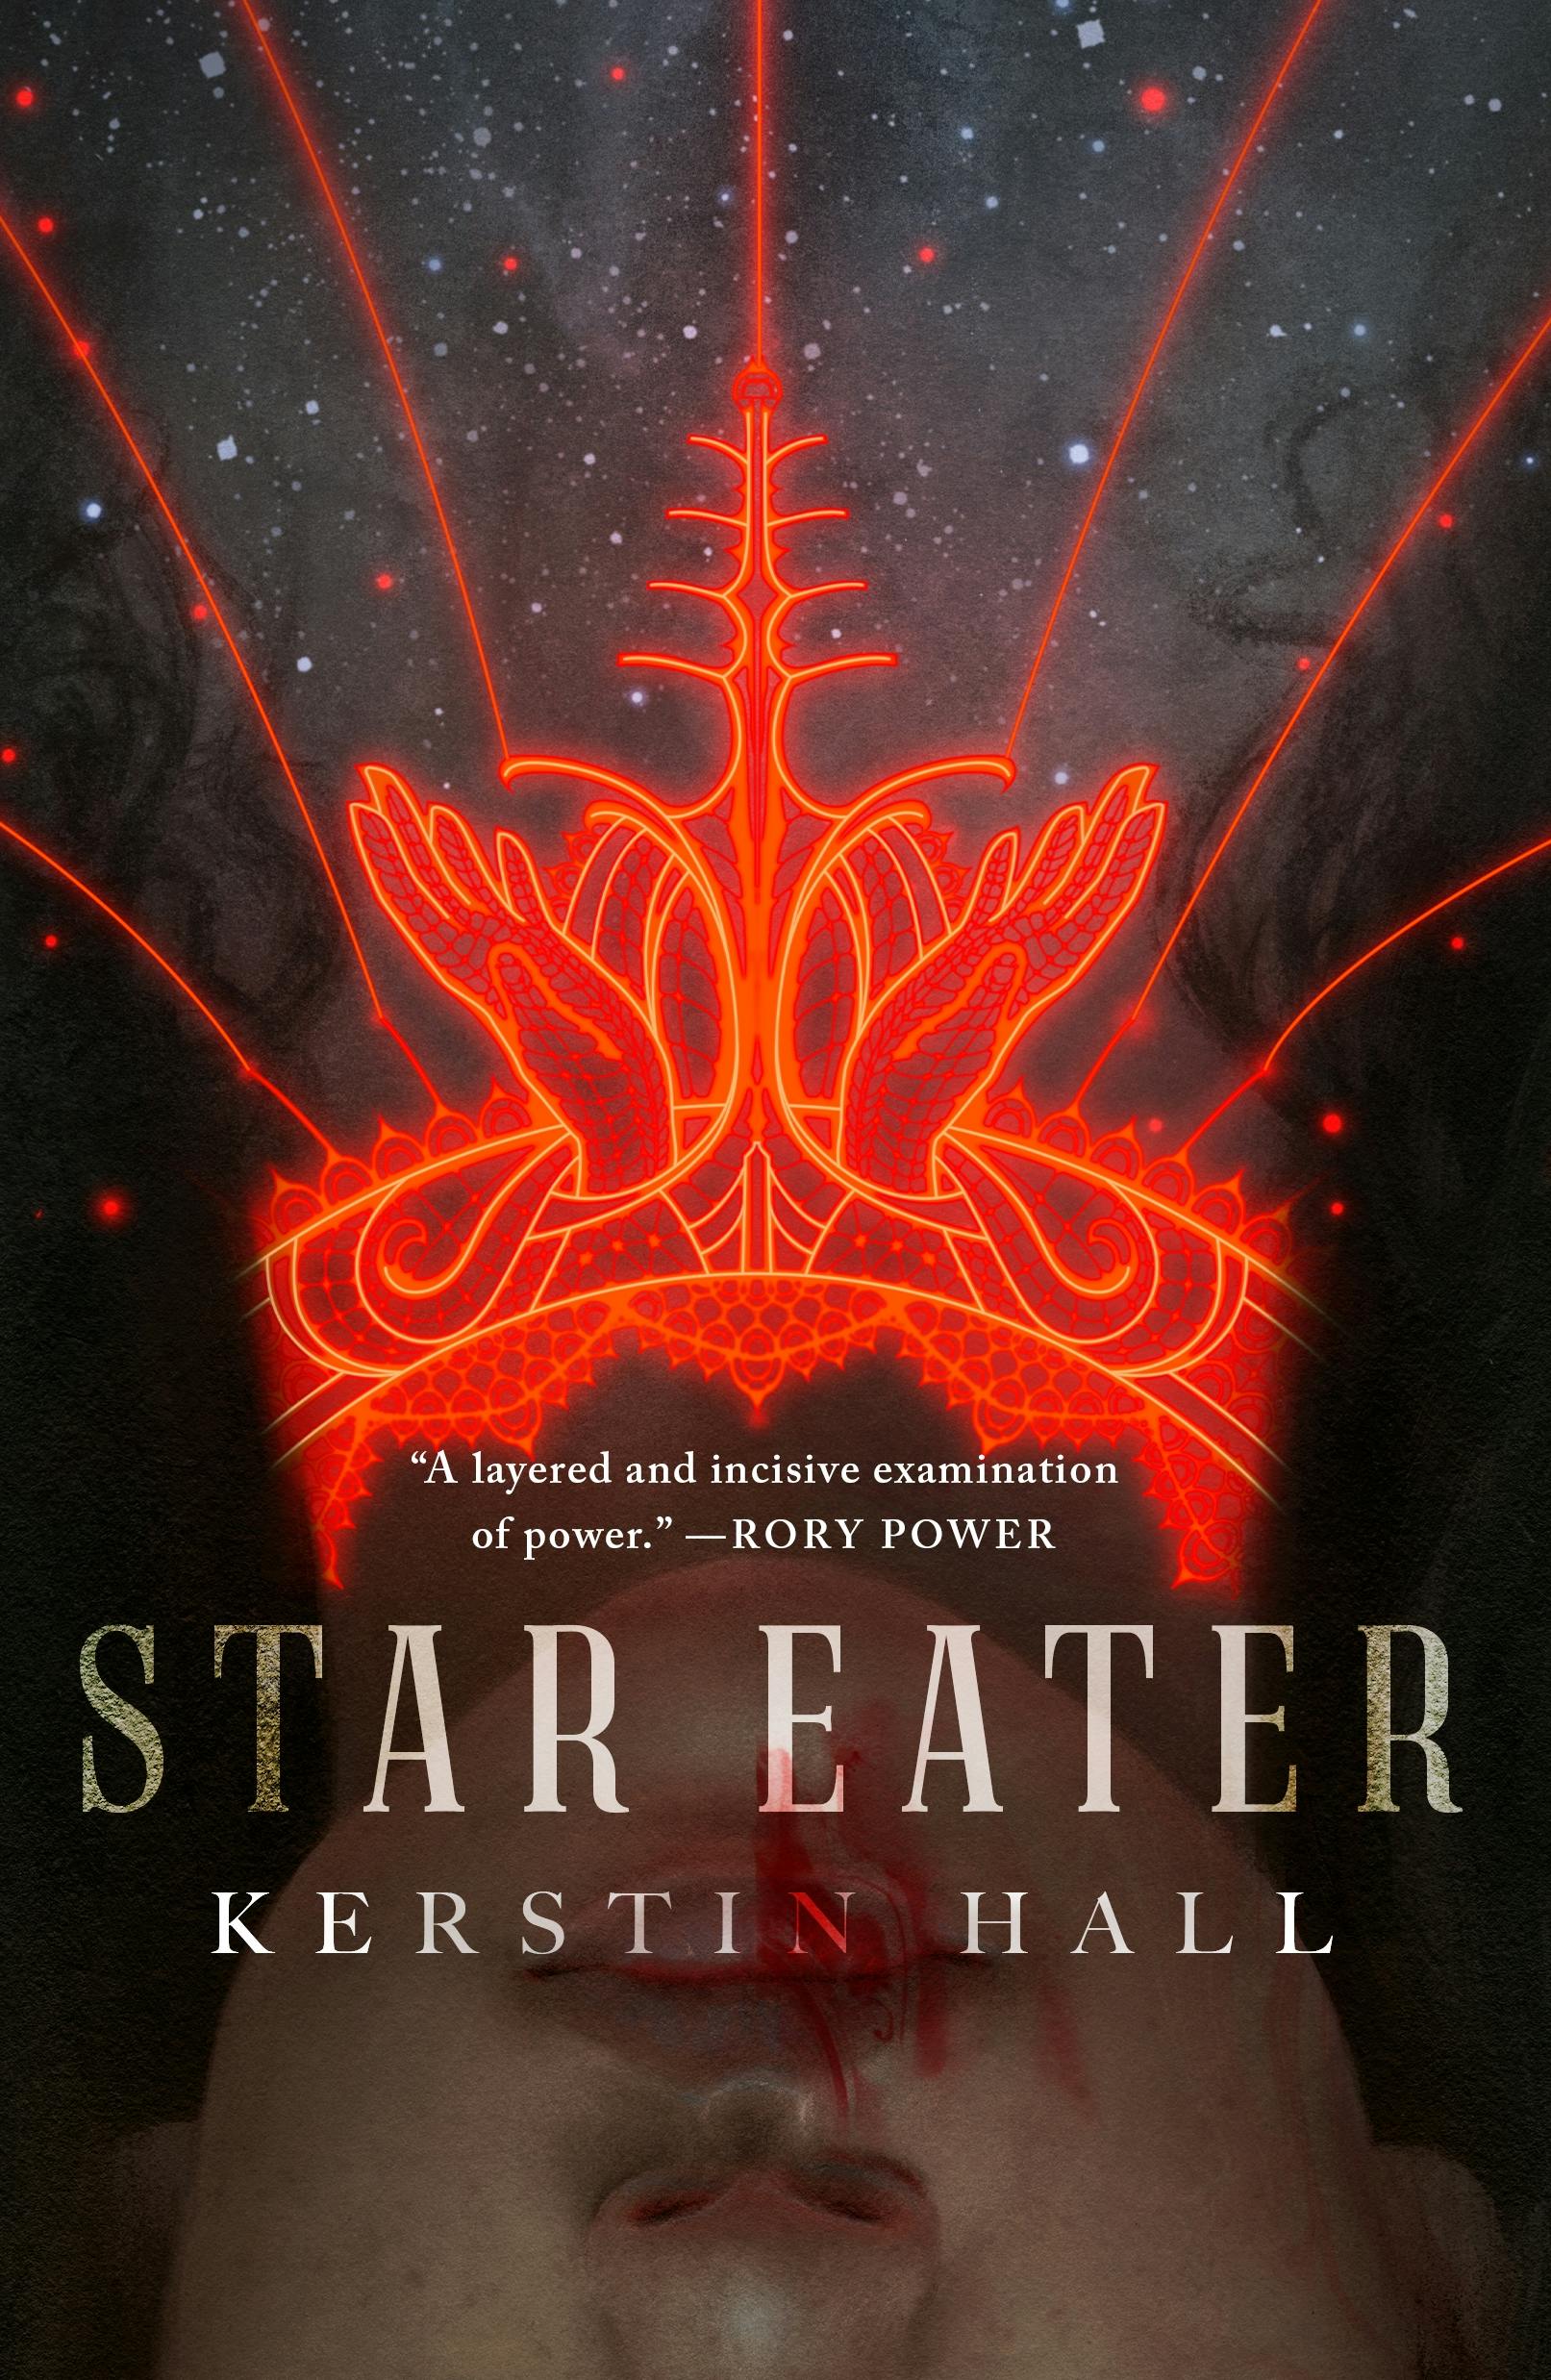 Cover for the book titled as: Star Eater